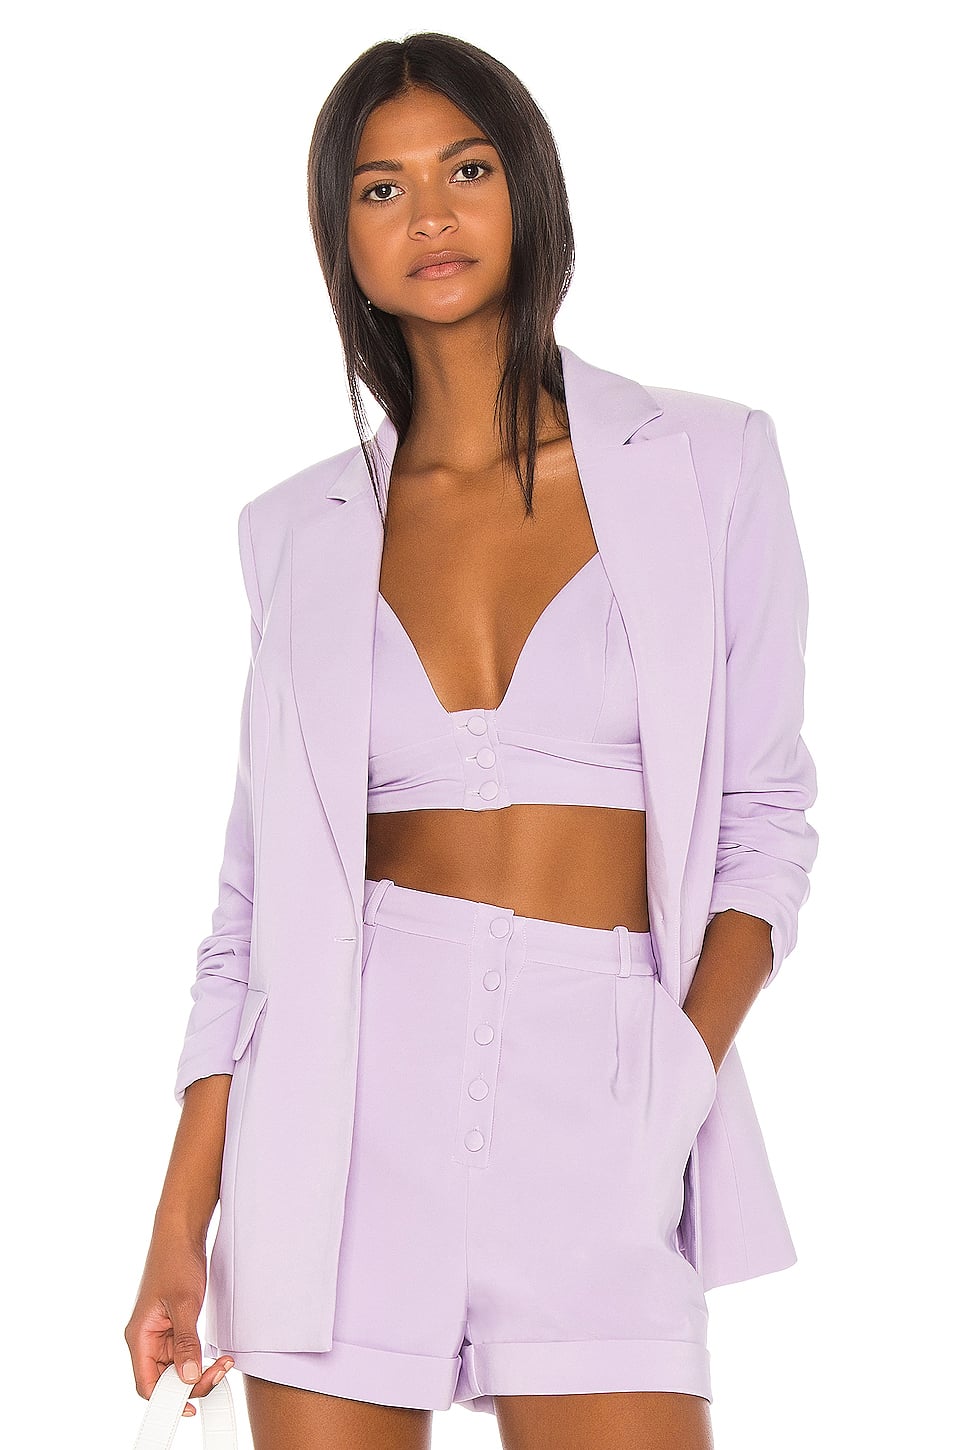 Hailey Bieber's Purple Monochrome Outfit: See Her Lavender Look Here –  StyleCaster